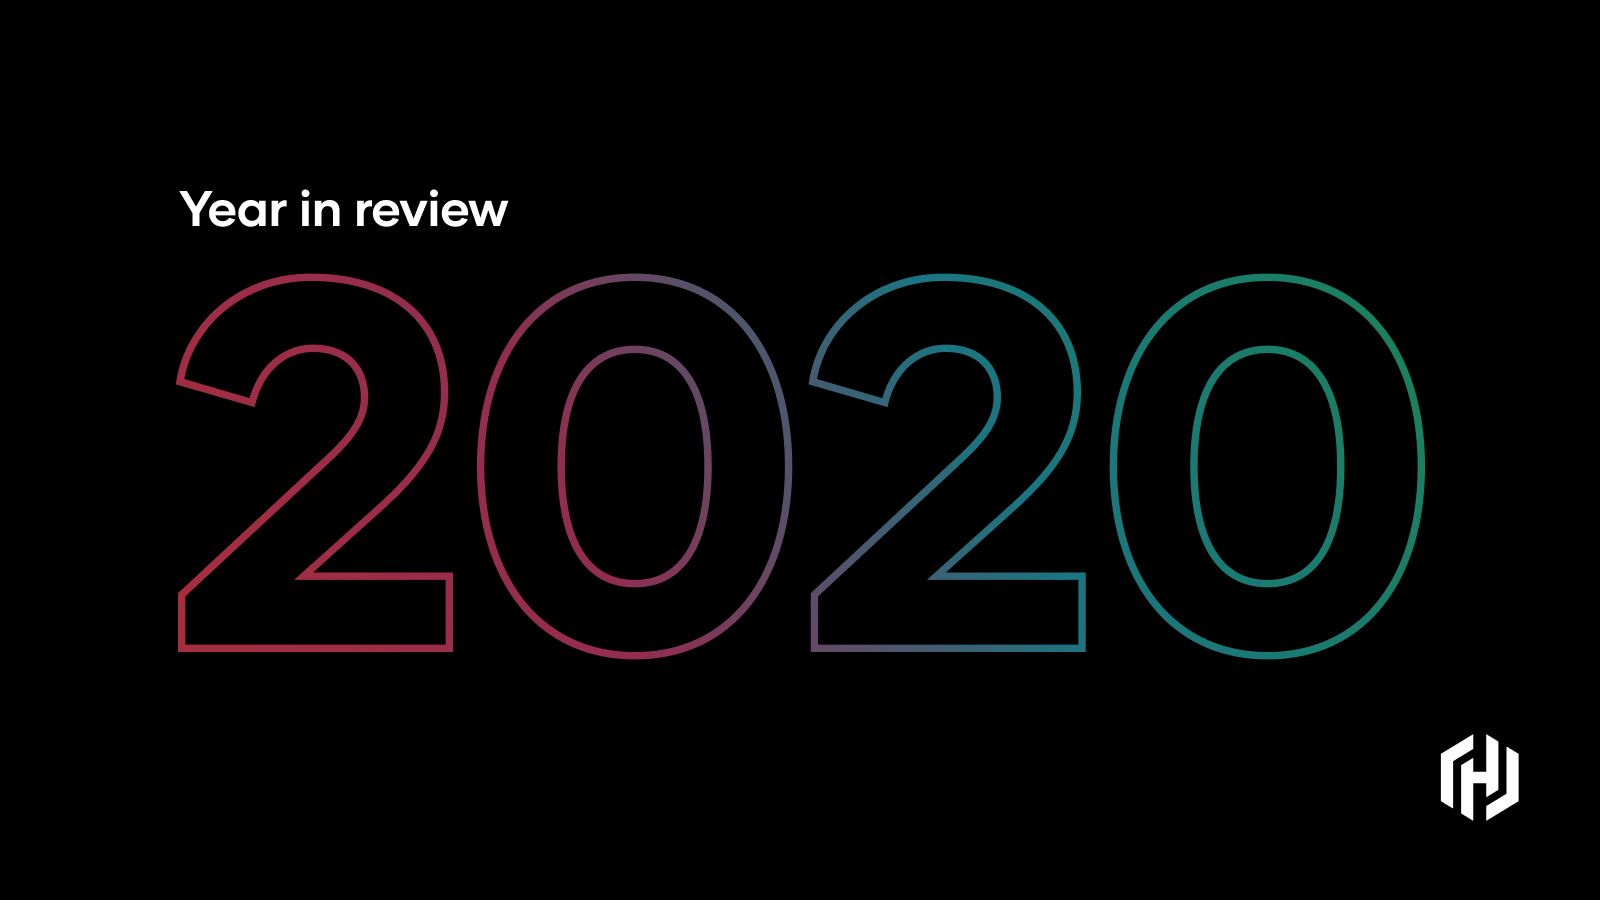 HashiCorp 2020 Year in Review